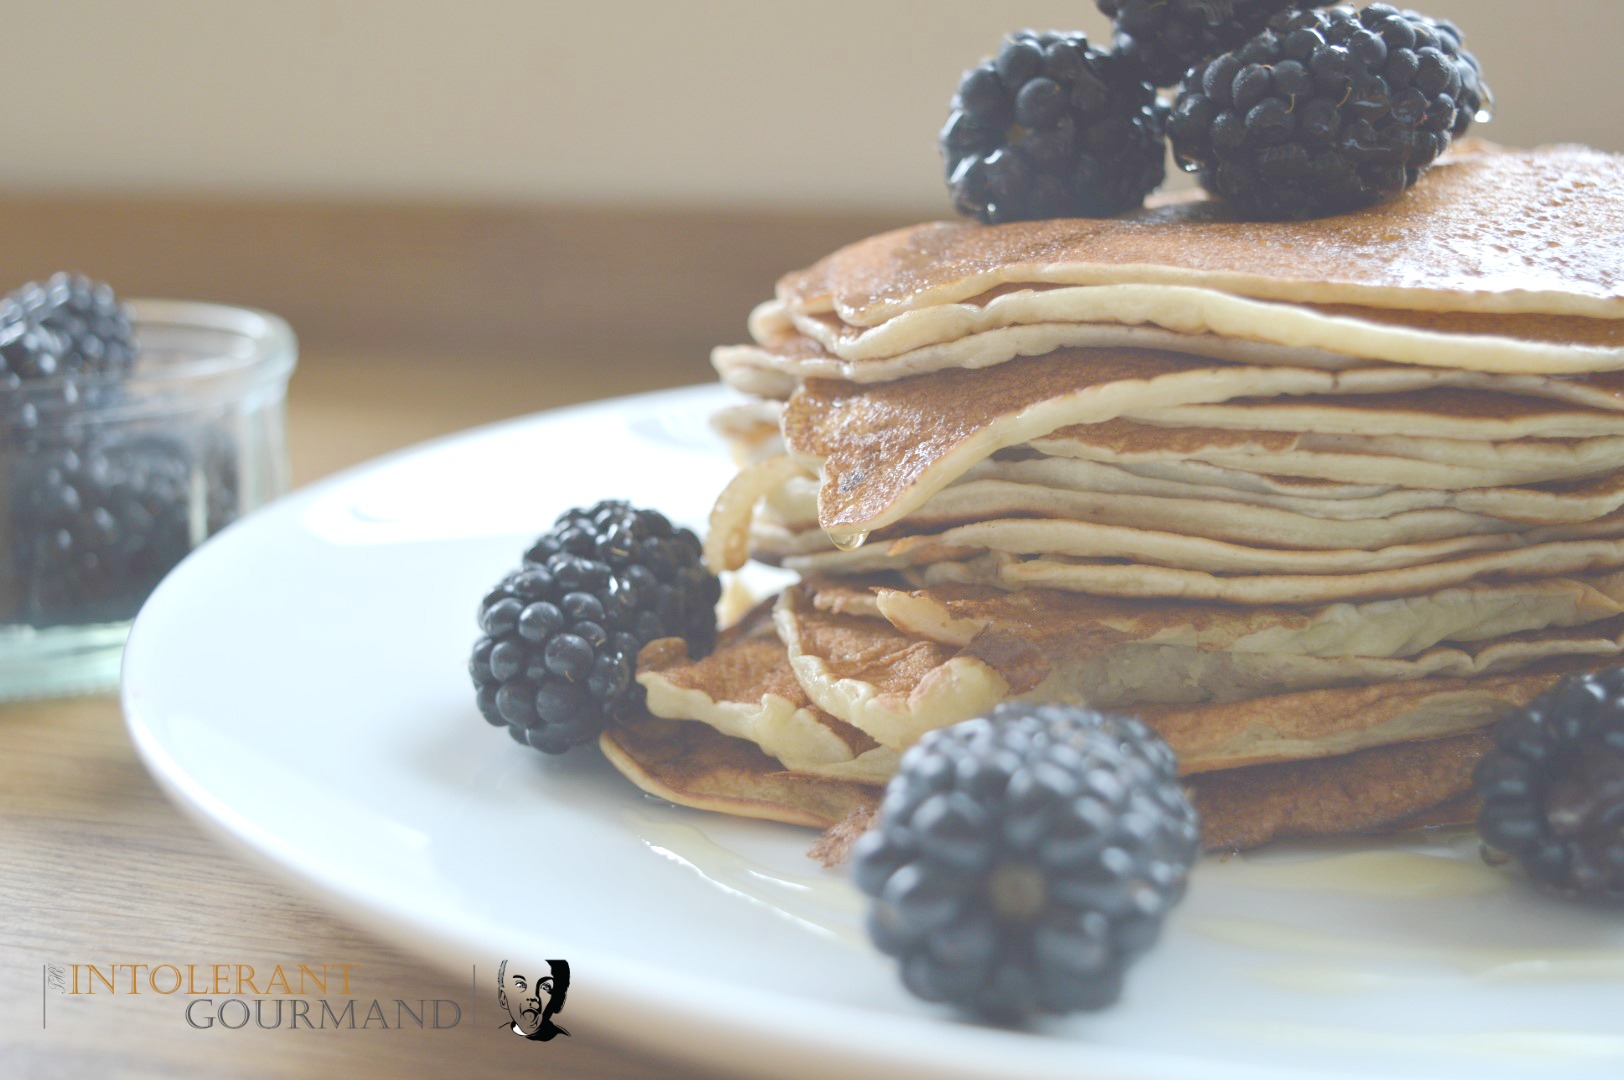 American pancake stack - dairy-free, gluten-free, wheat-free, egg-free, nut-free and simply delicious! www.intolerantgourmand.com